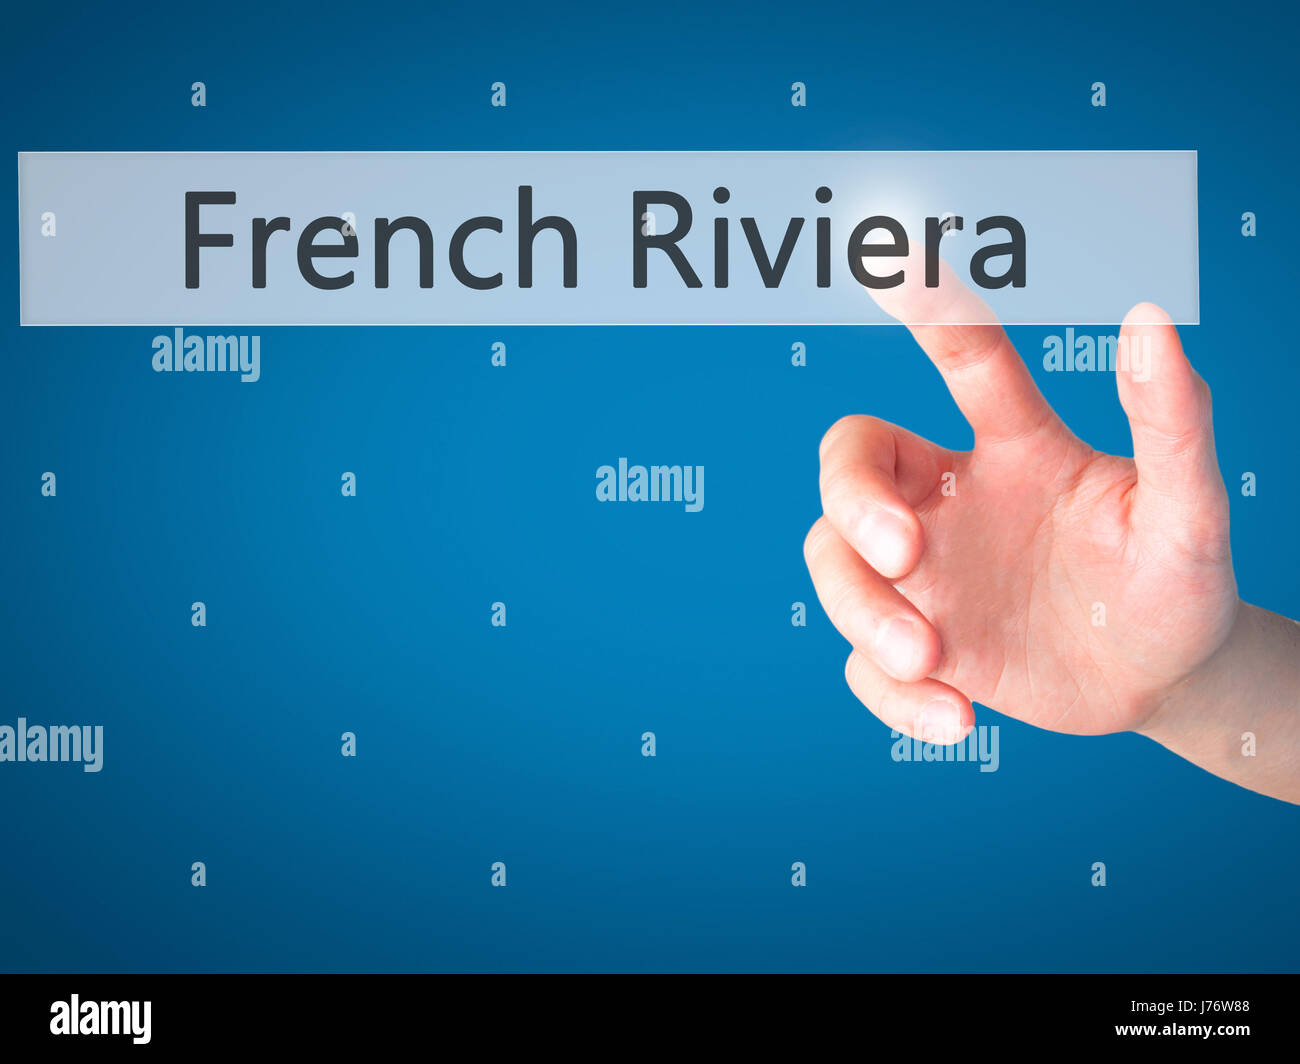 French Riviera - Hand pressing a button on blurred background concept . Business, technology, internet concept. Stock Photo Stock Photo